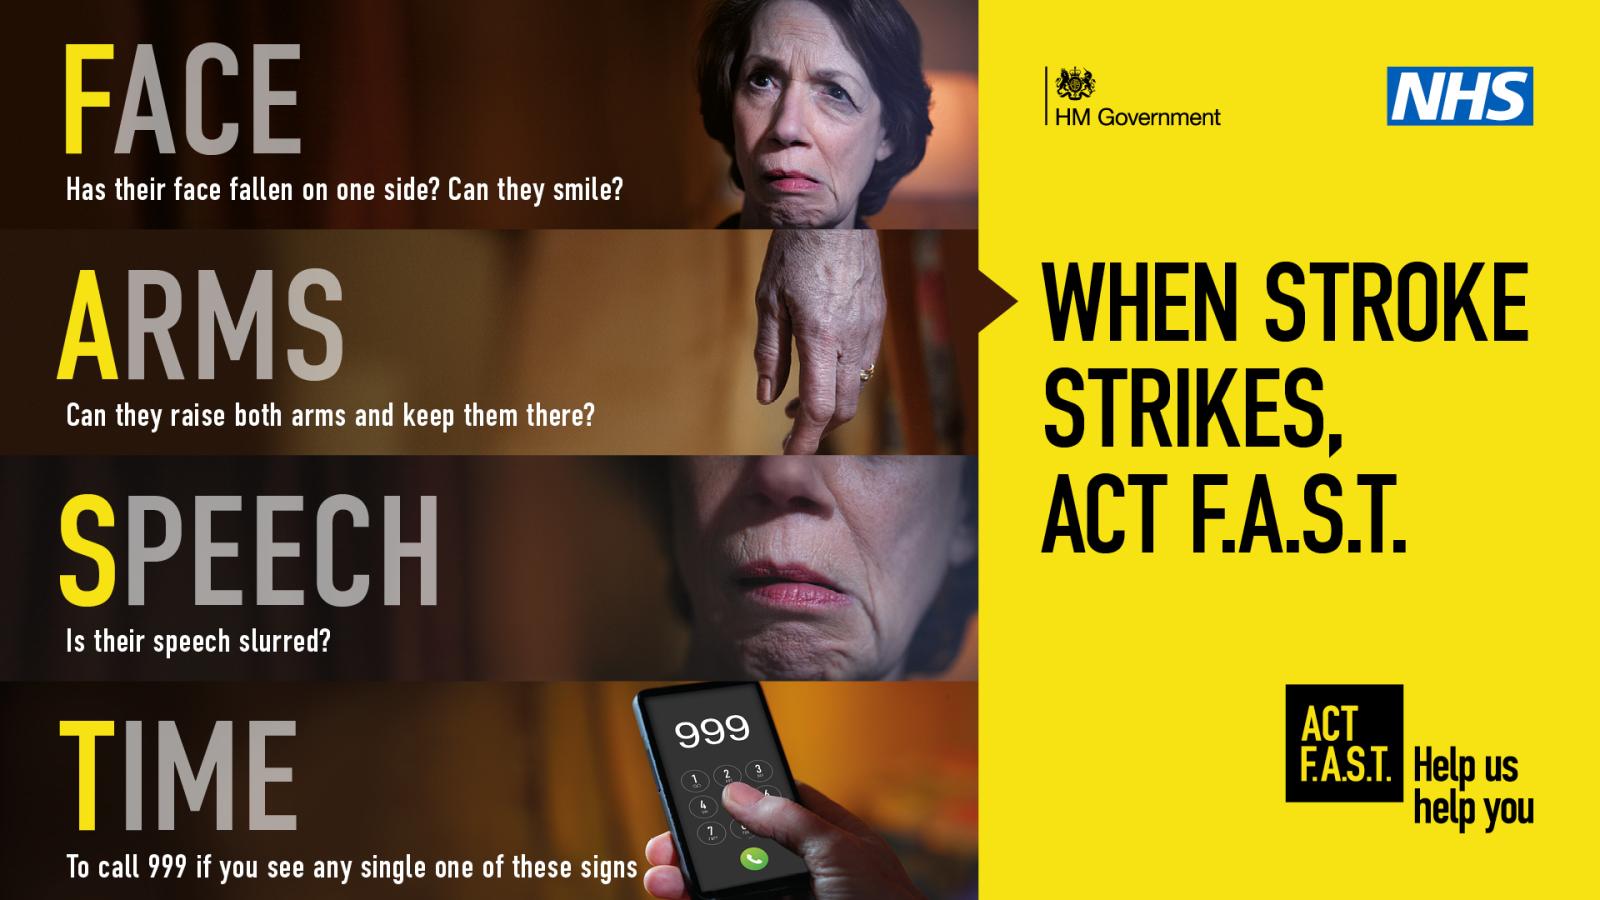 Image of the NHS Stroke FAST campaign